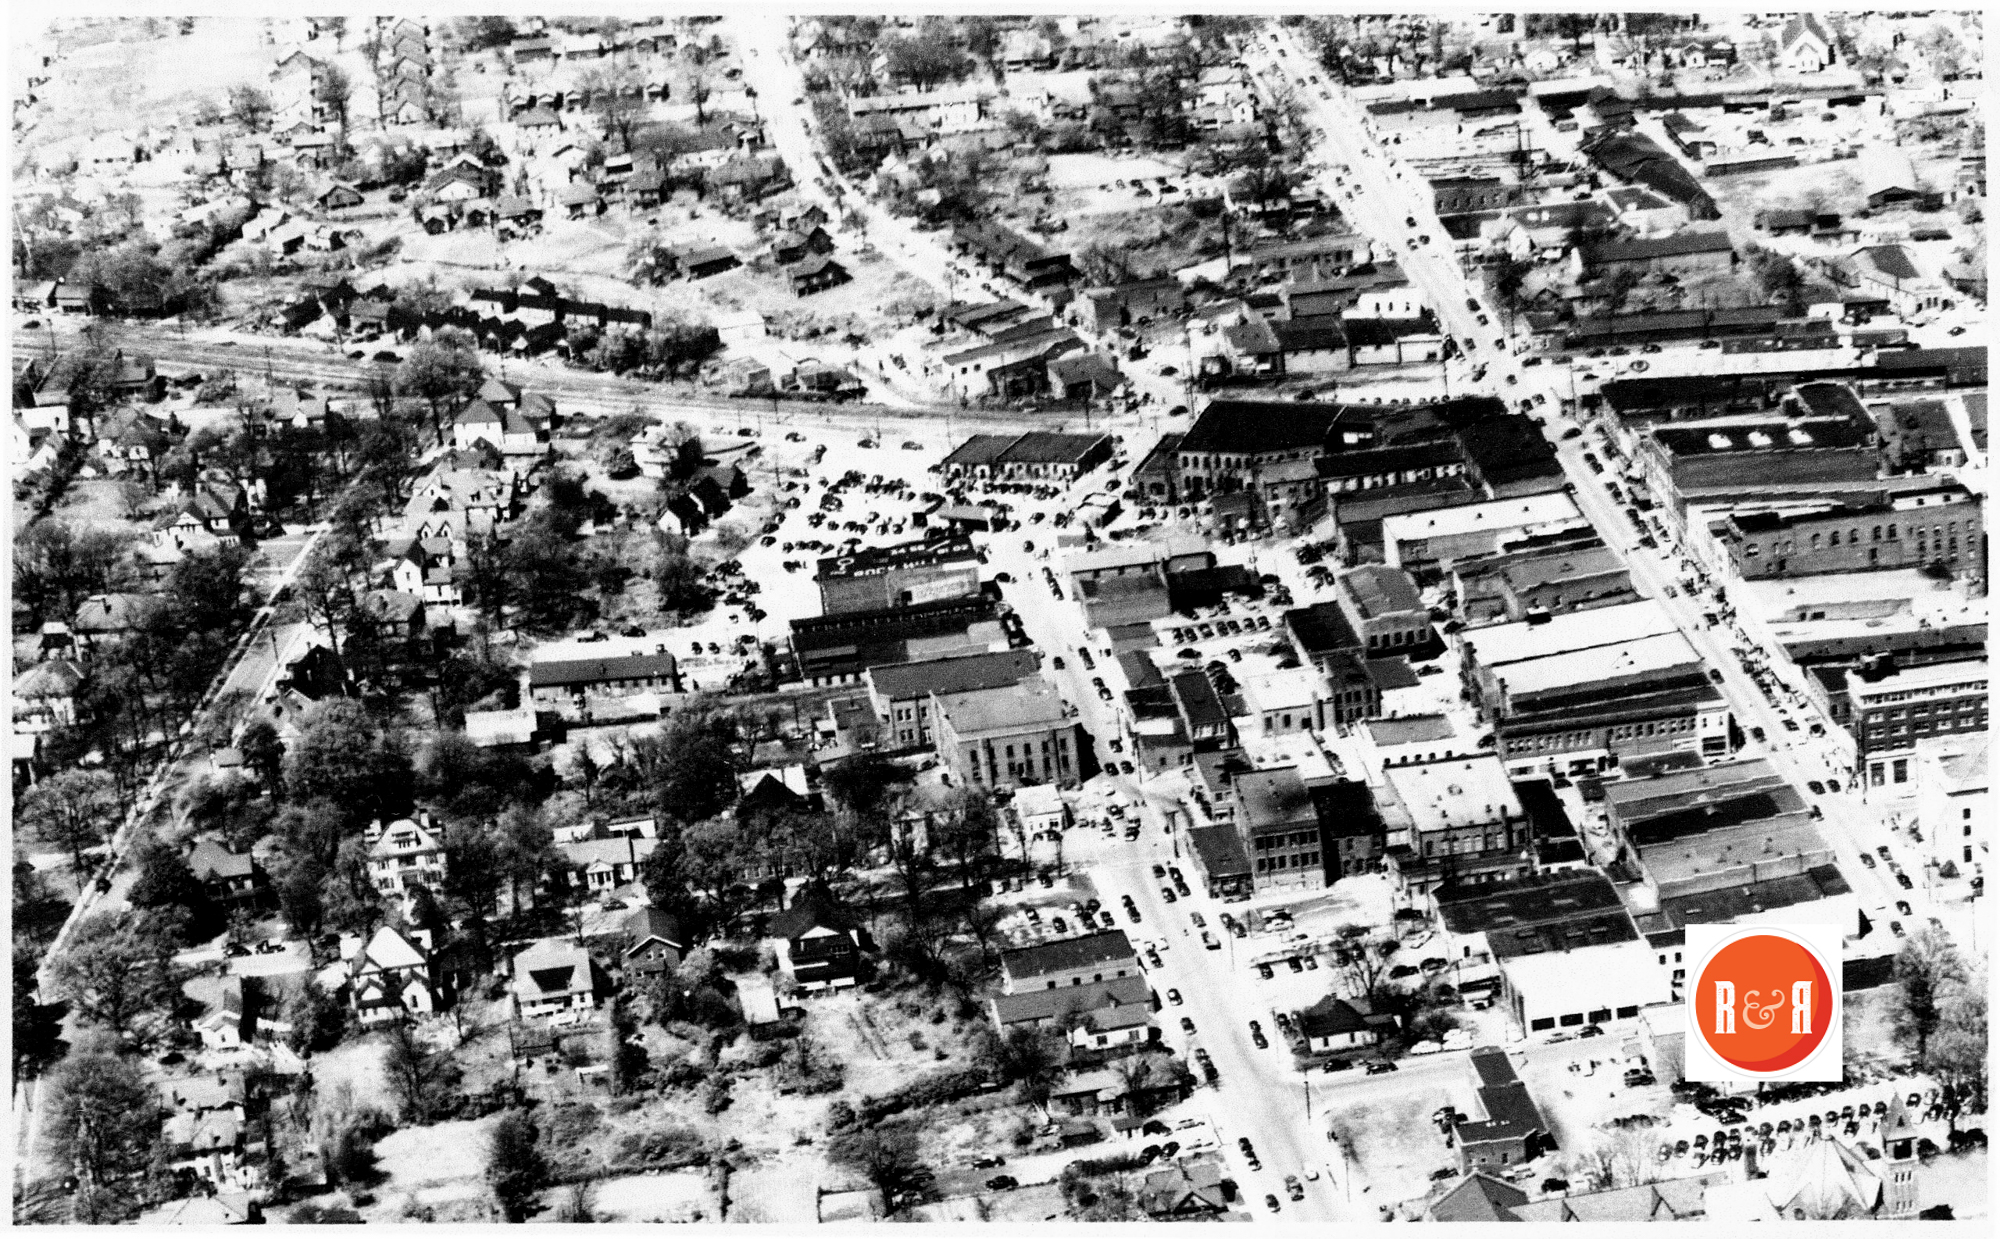 1950 AERIAL MAP OF DOWNTOWN RH